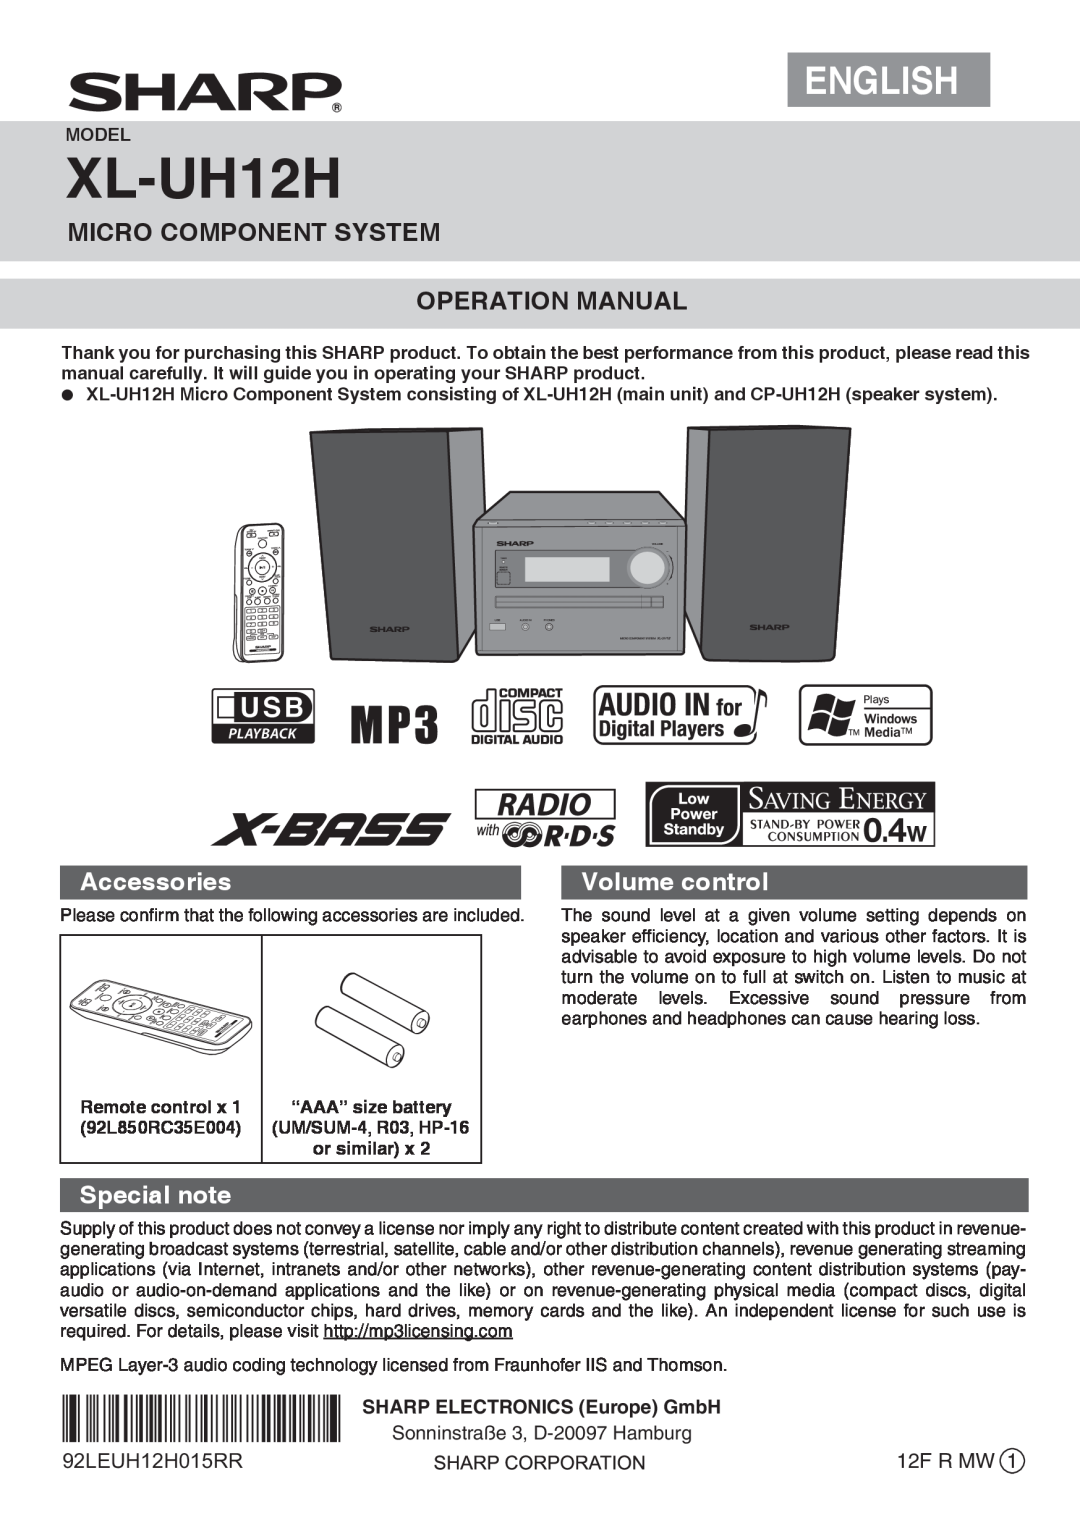 Sharp XL-UH12H operation manual Micro Component System Operation Manual, Accessories, Volume control, Special note, Model 